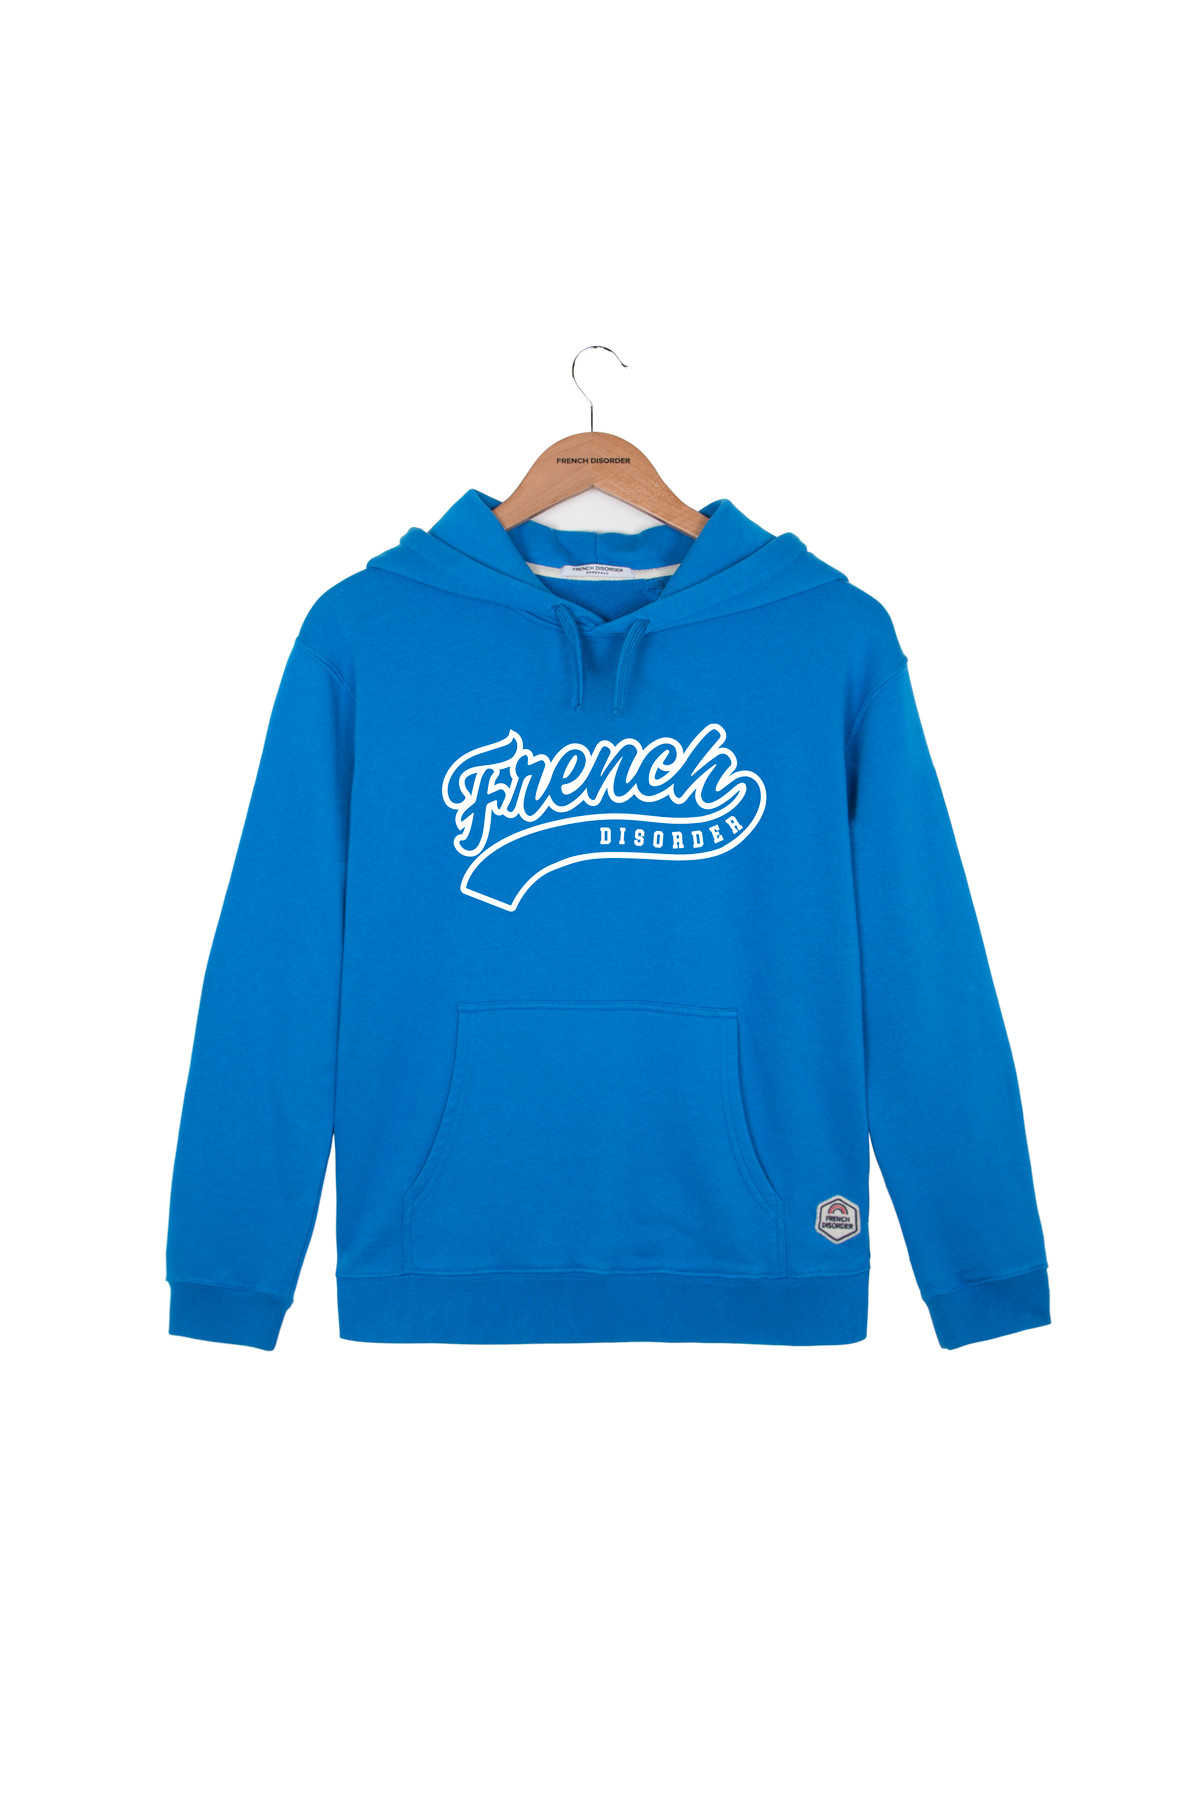 Photo de Anciennes collections kids Hoodie FRENCH COLLEGE chez French Disorder